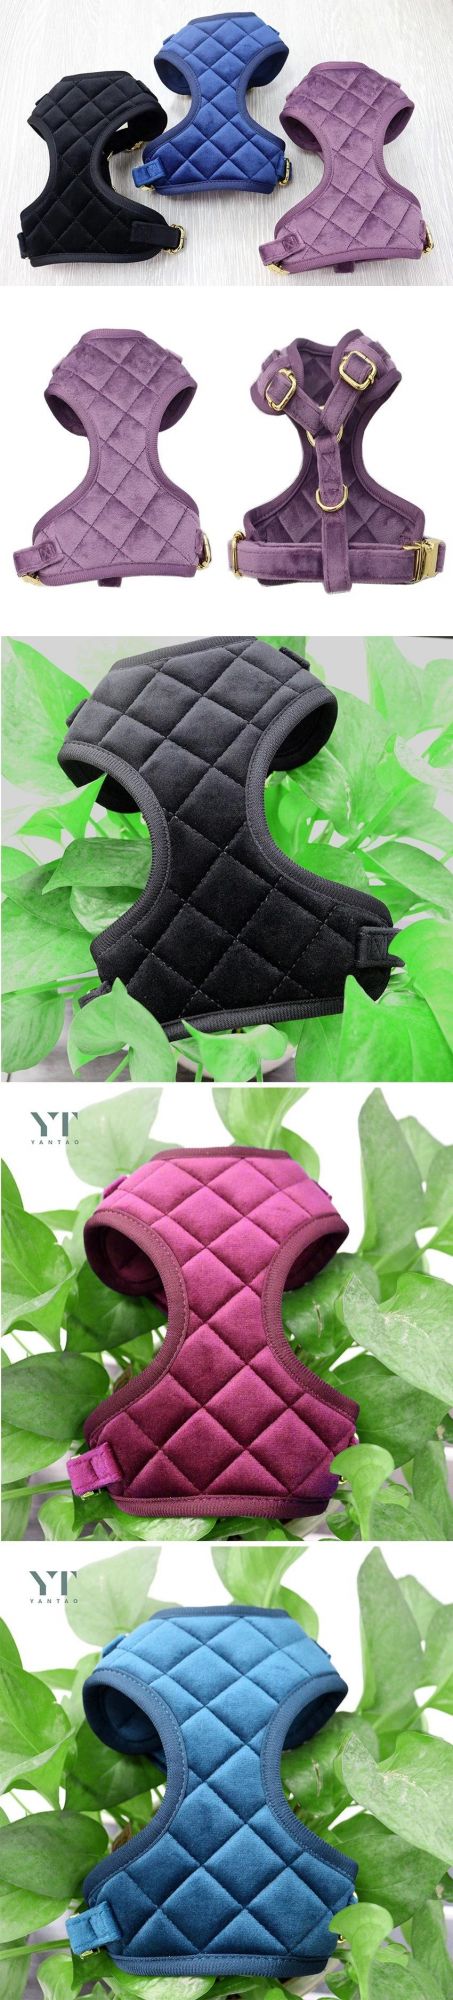 Luxury High Quality Pet Accessories Premium Gold Buckle Dog Quilted Vest Dog Harness Pet Harness